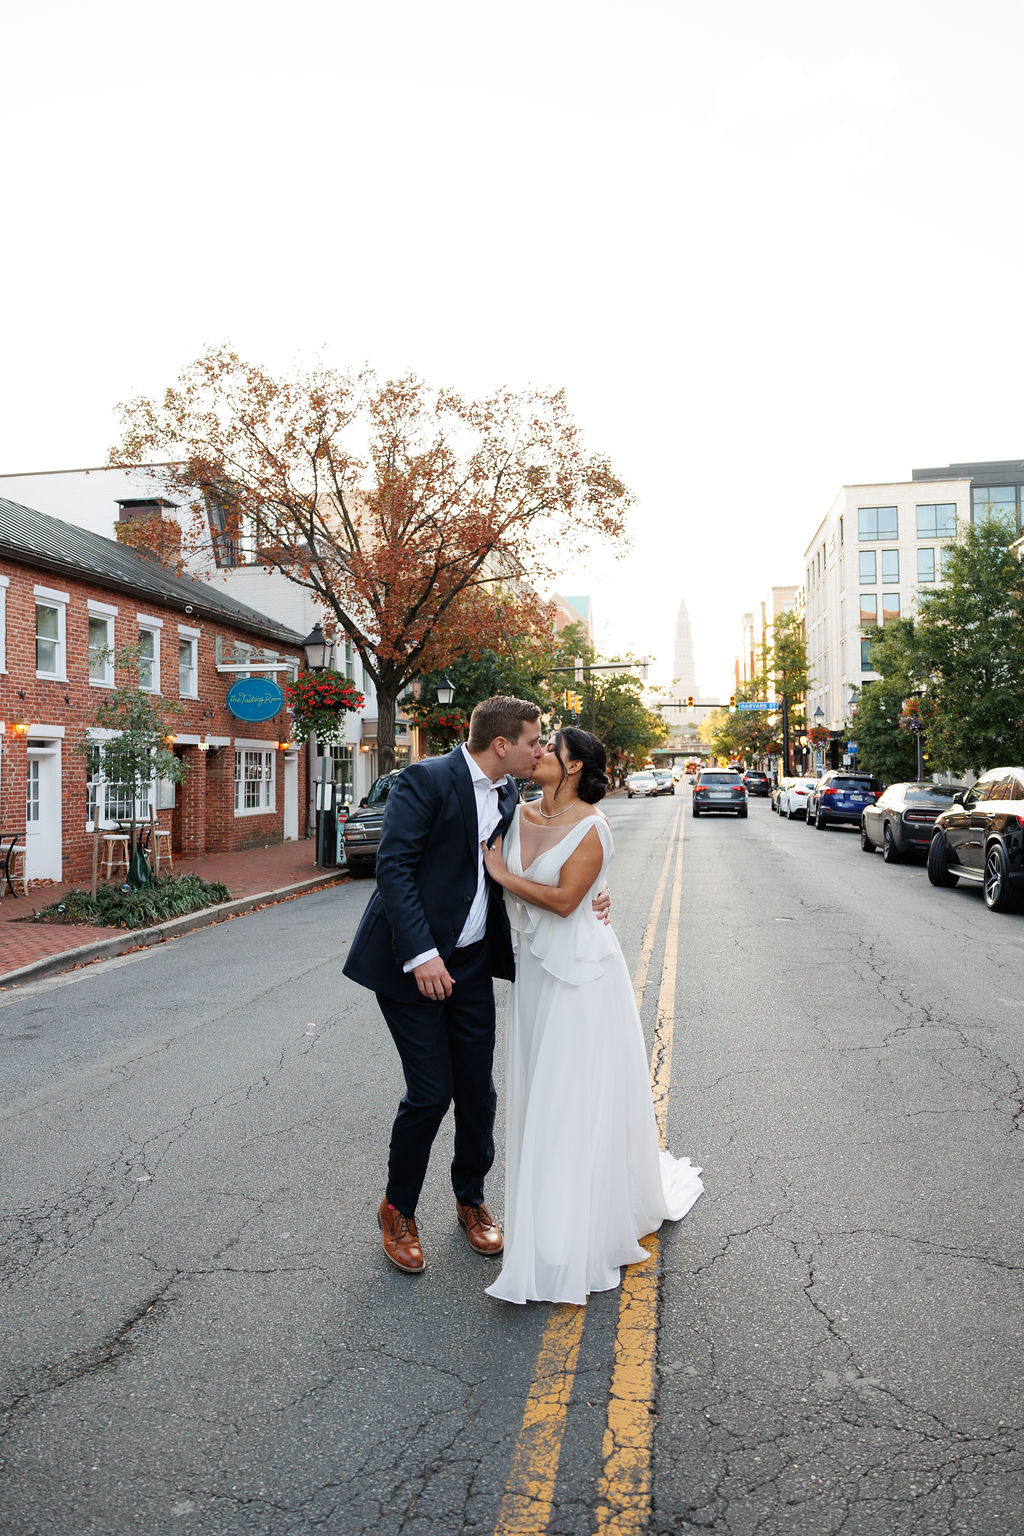 Newlyweds kiss while walking in the street